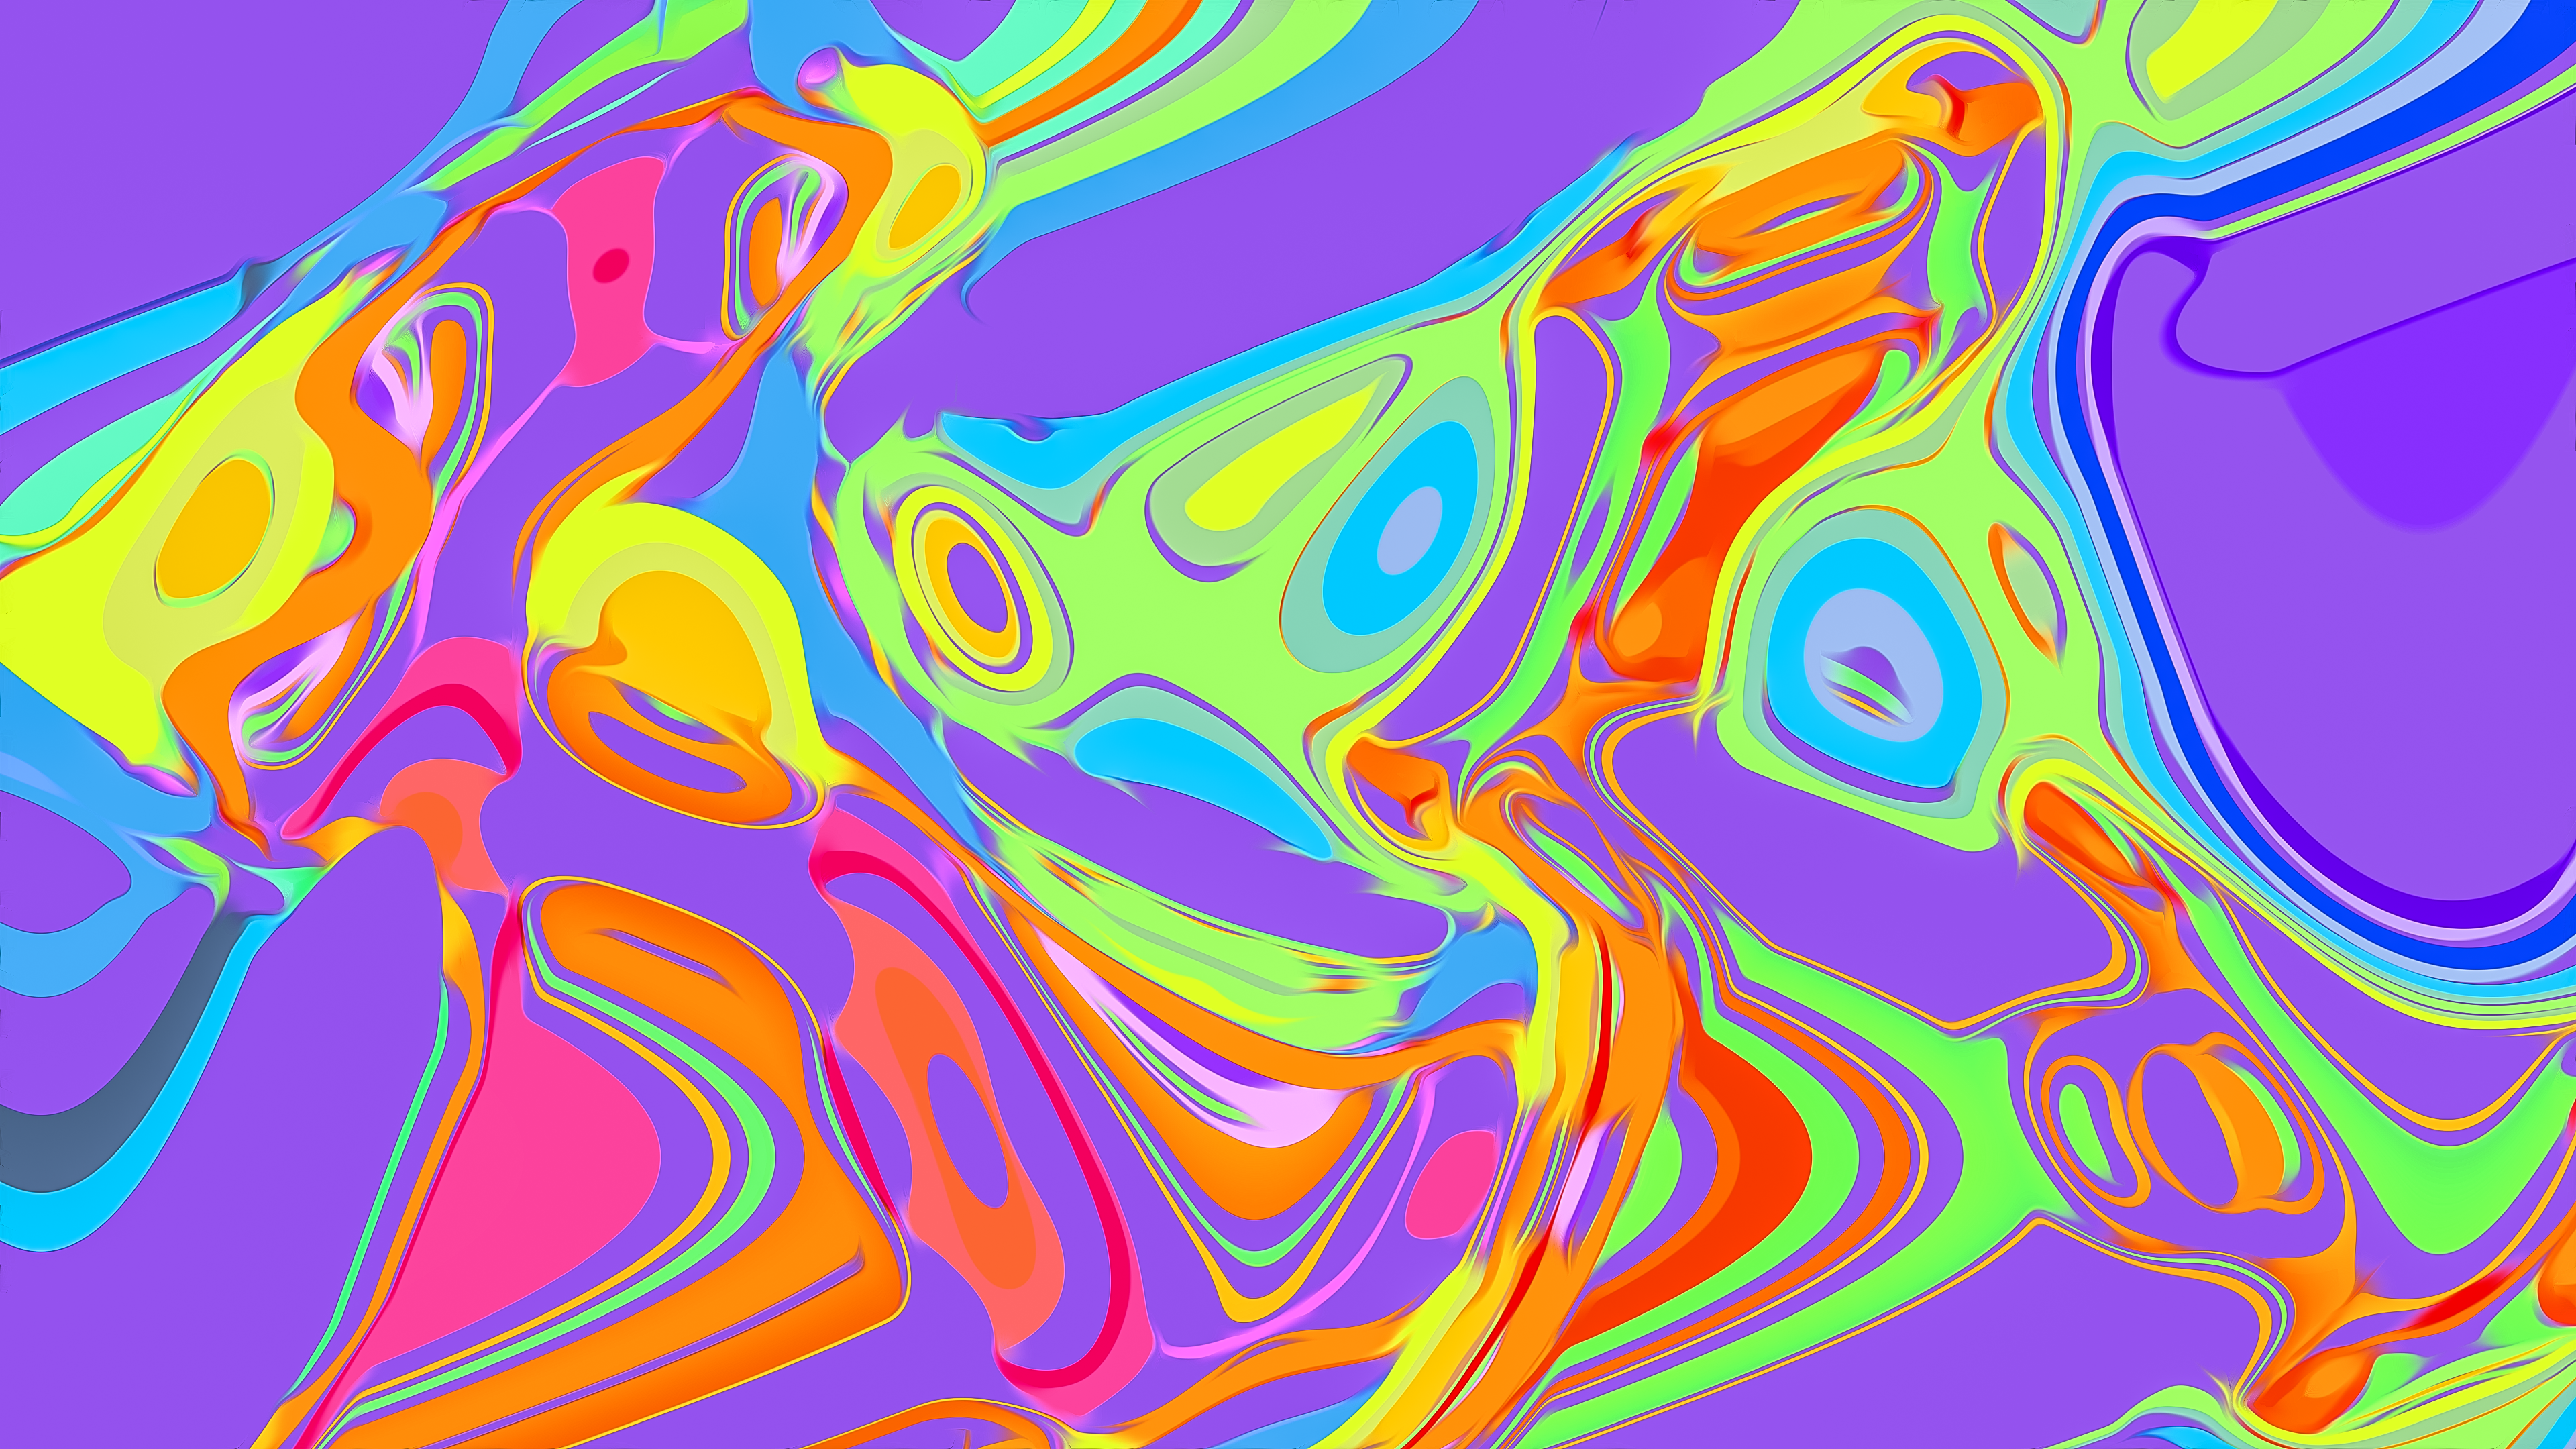 General 3840x2160 abstract GNOME psychedelic purple colorful